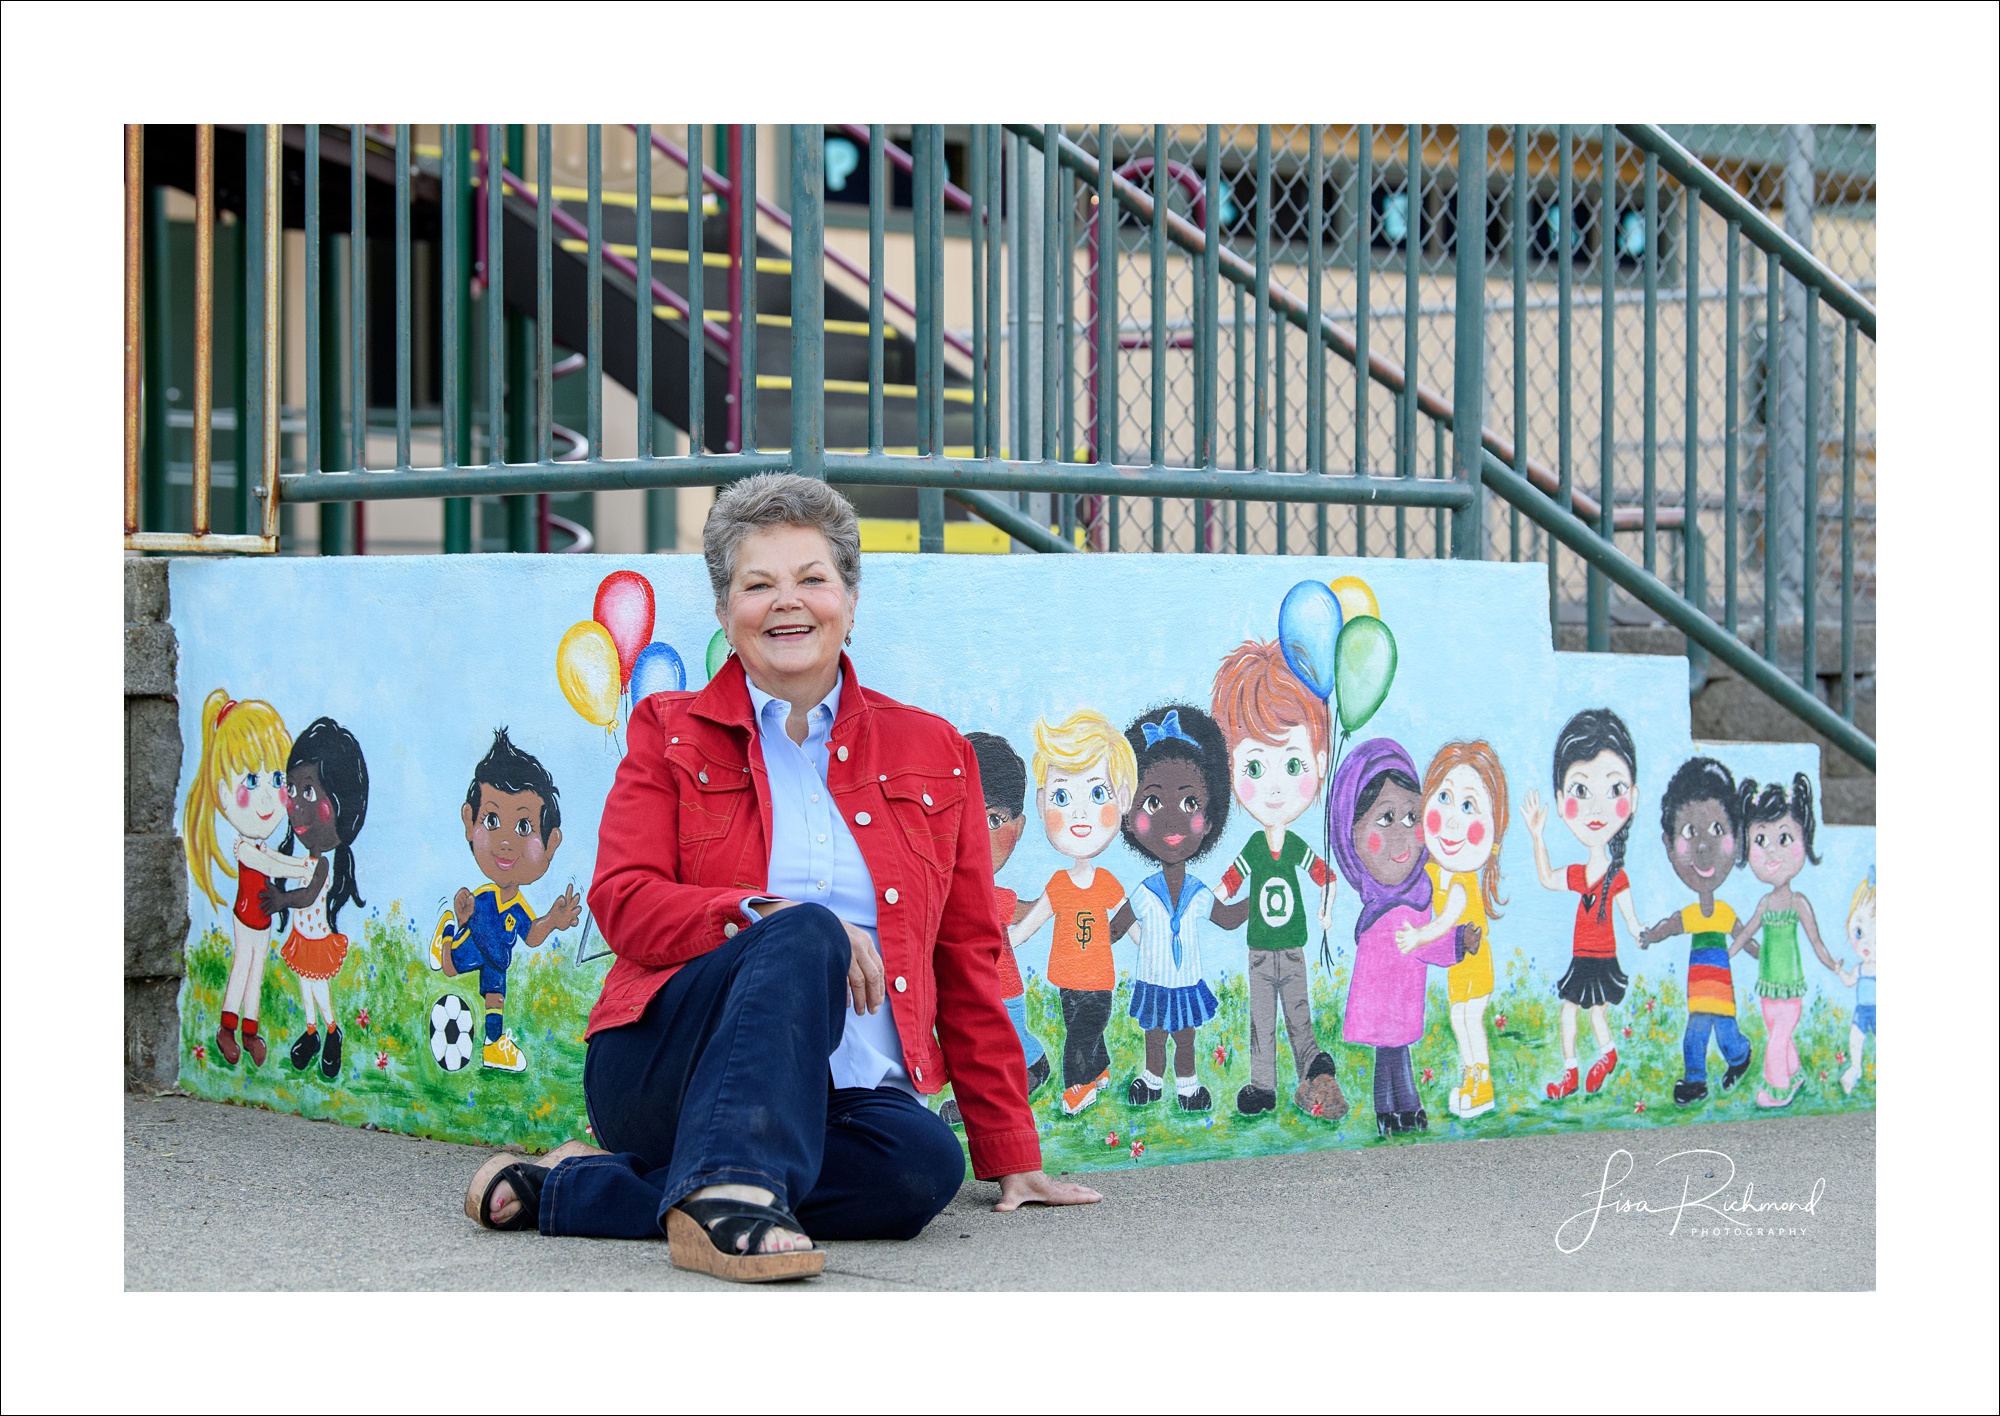 Debra Power, a local artist(and kid at heart) adds beauty to our community